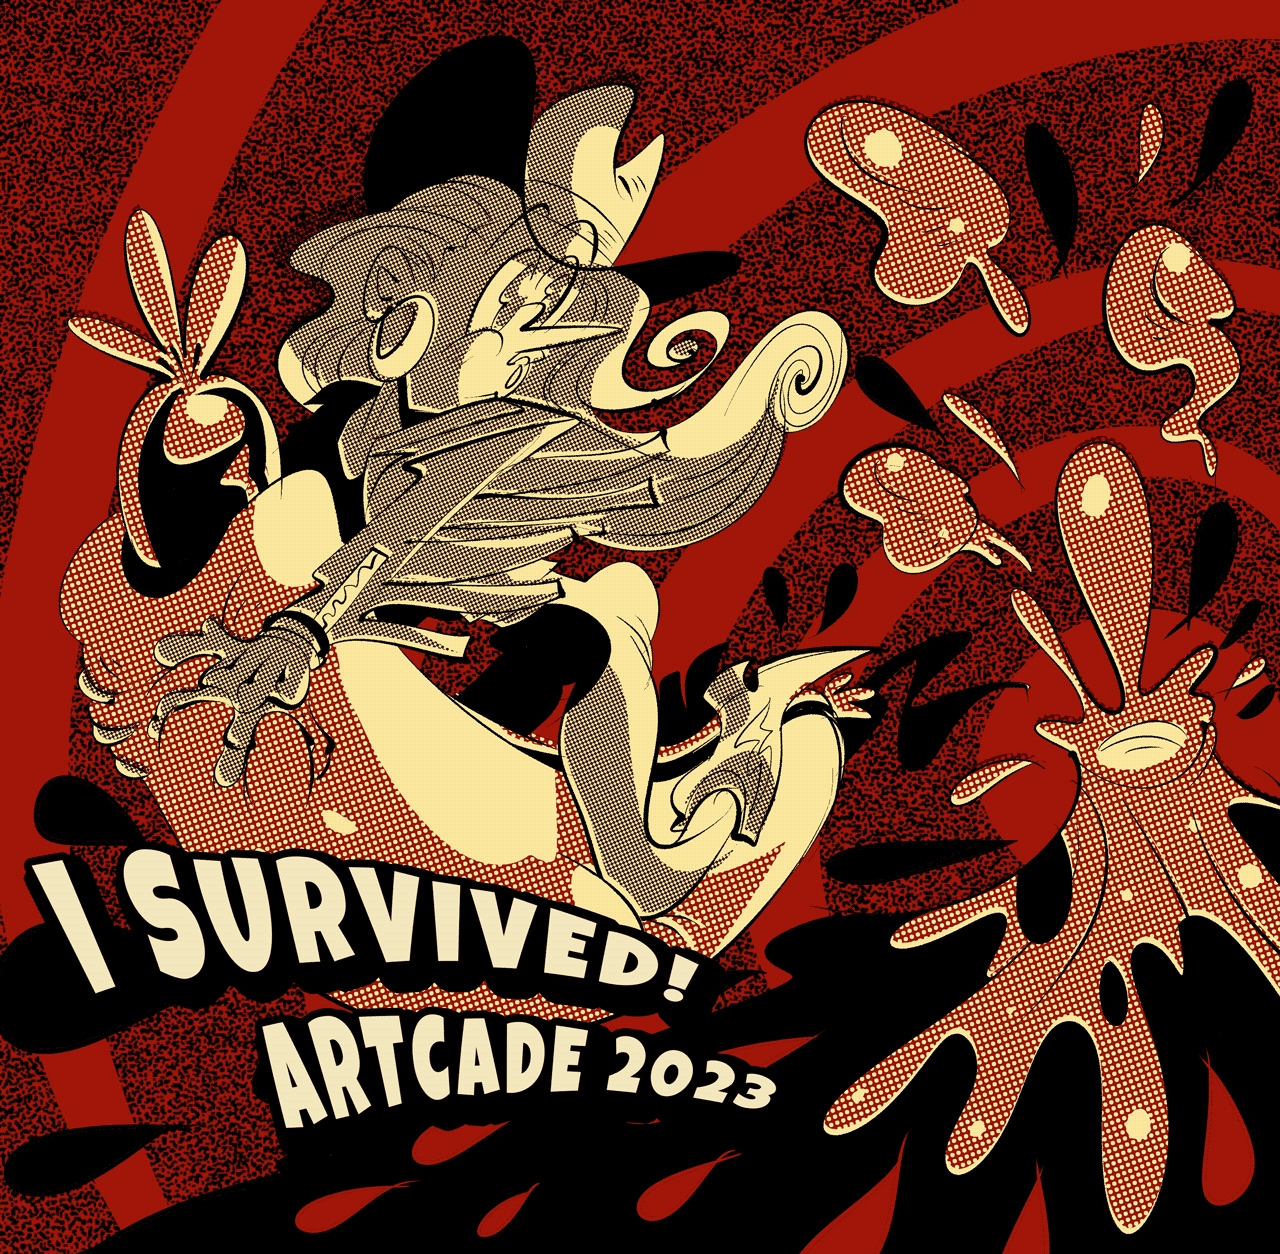 illustration of angus riding a sloppy weenie away from an erupting volcano.  The text reads: I survived!  Artcade 2023